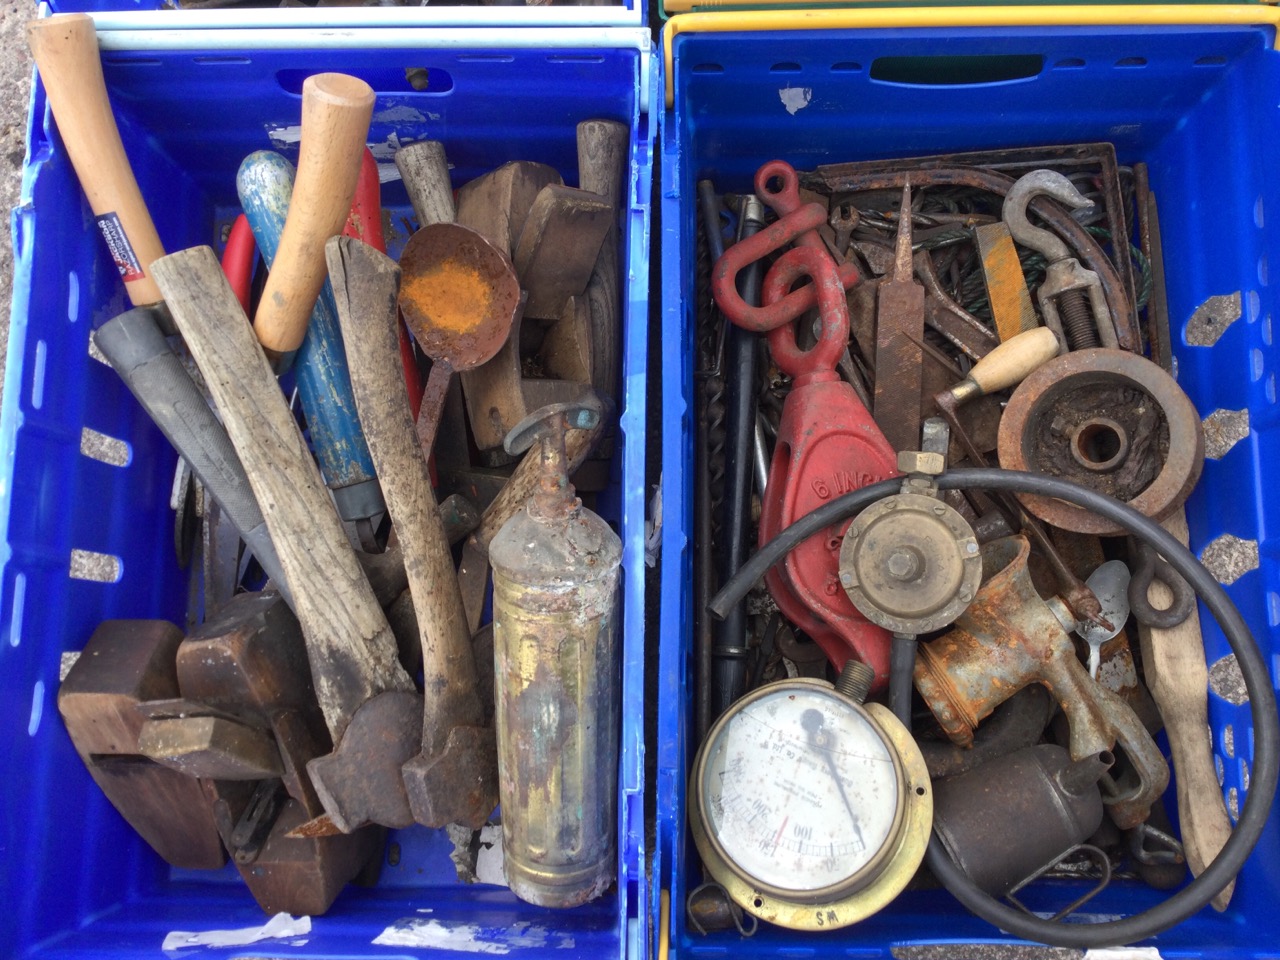 Miscellaneous tools including axes, spanners, pulleys, a jack, pumps, a pressure gauge, nuts & - Image 3 of 3